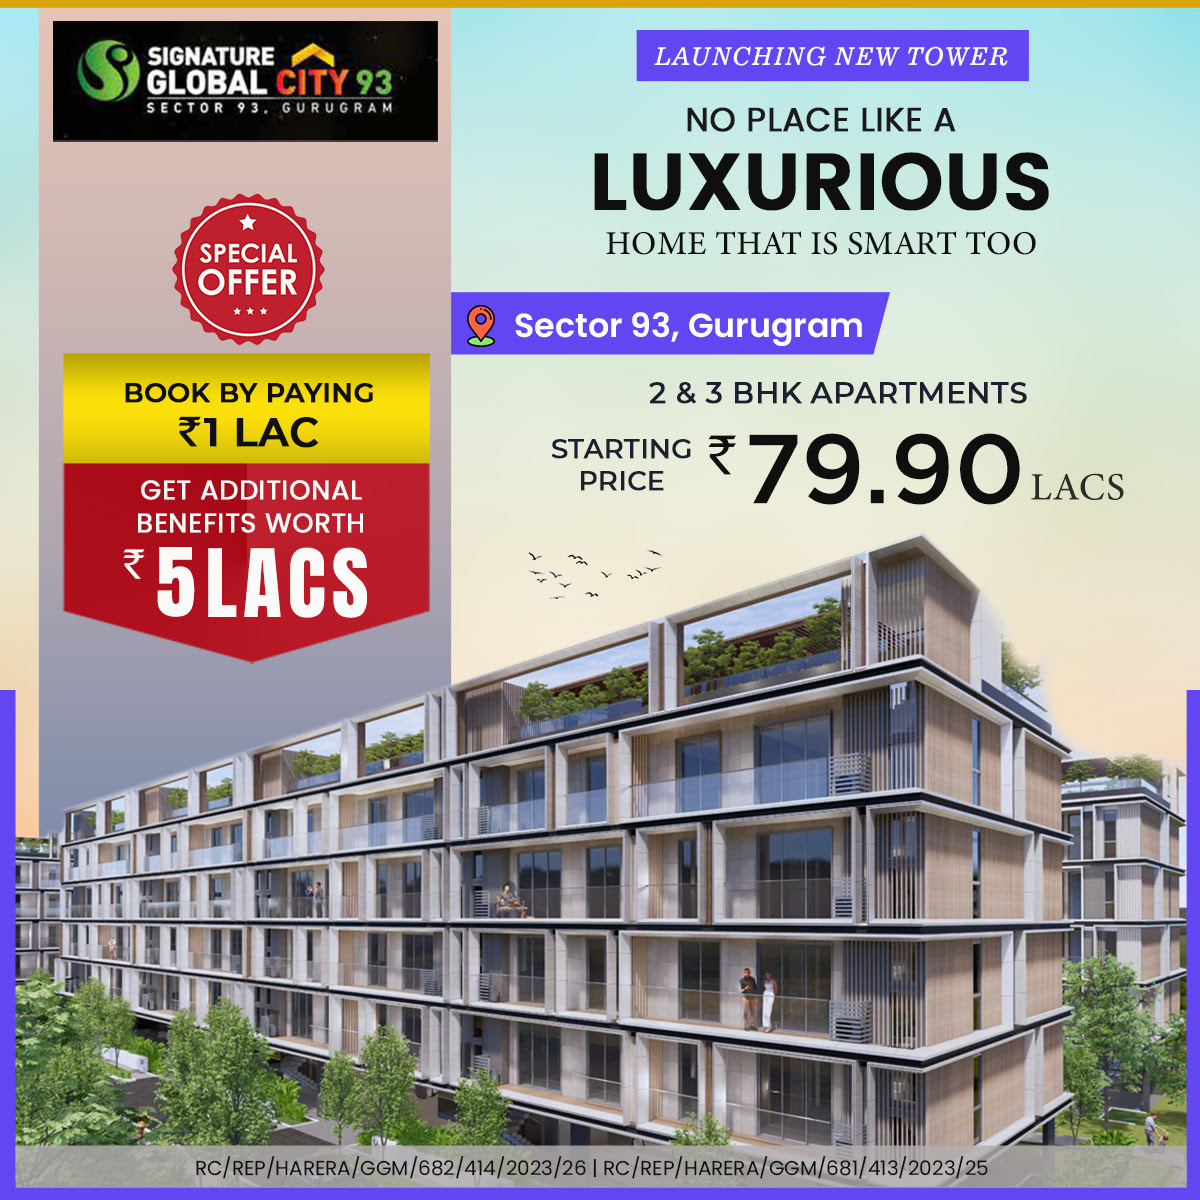 Get additional benefit worth RS 5 Lac at Signature Global City 93, Gurgaon Update